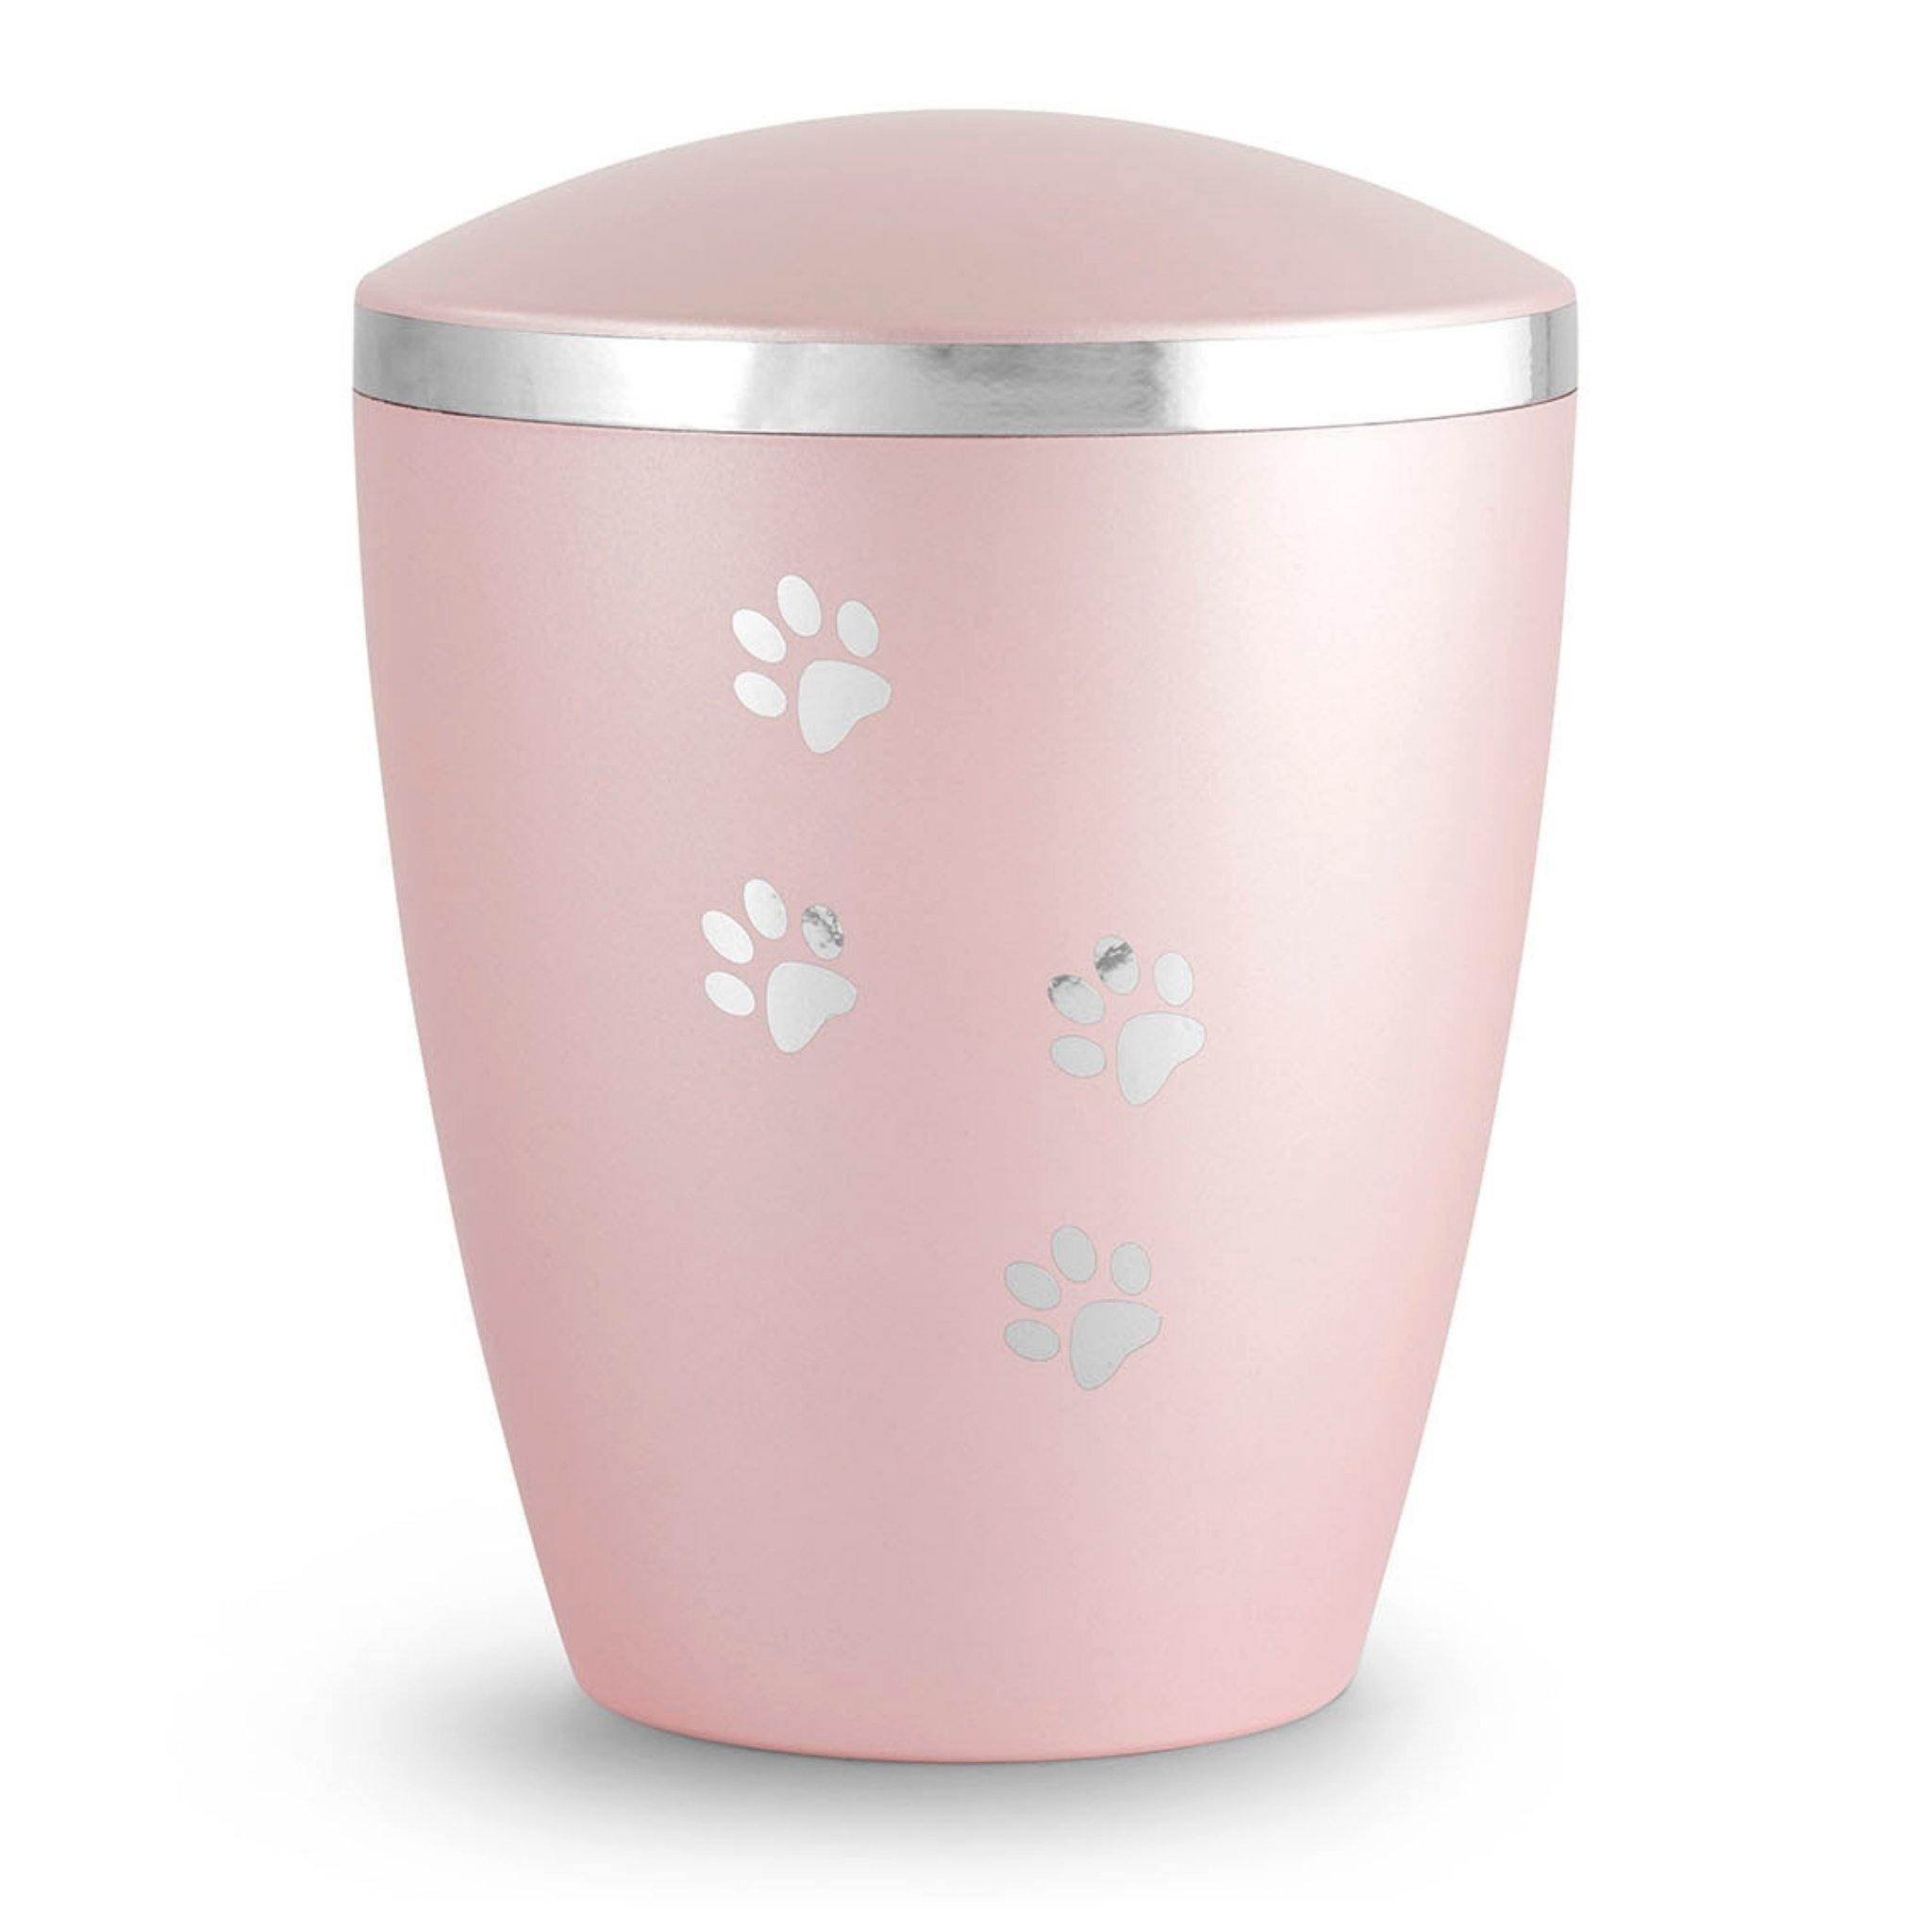 Otley Pawprints Biodegradable Cremation Ashes Urn VOL